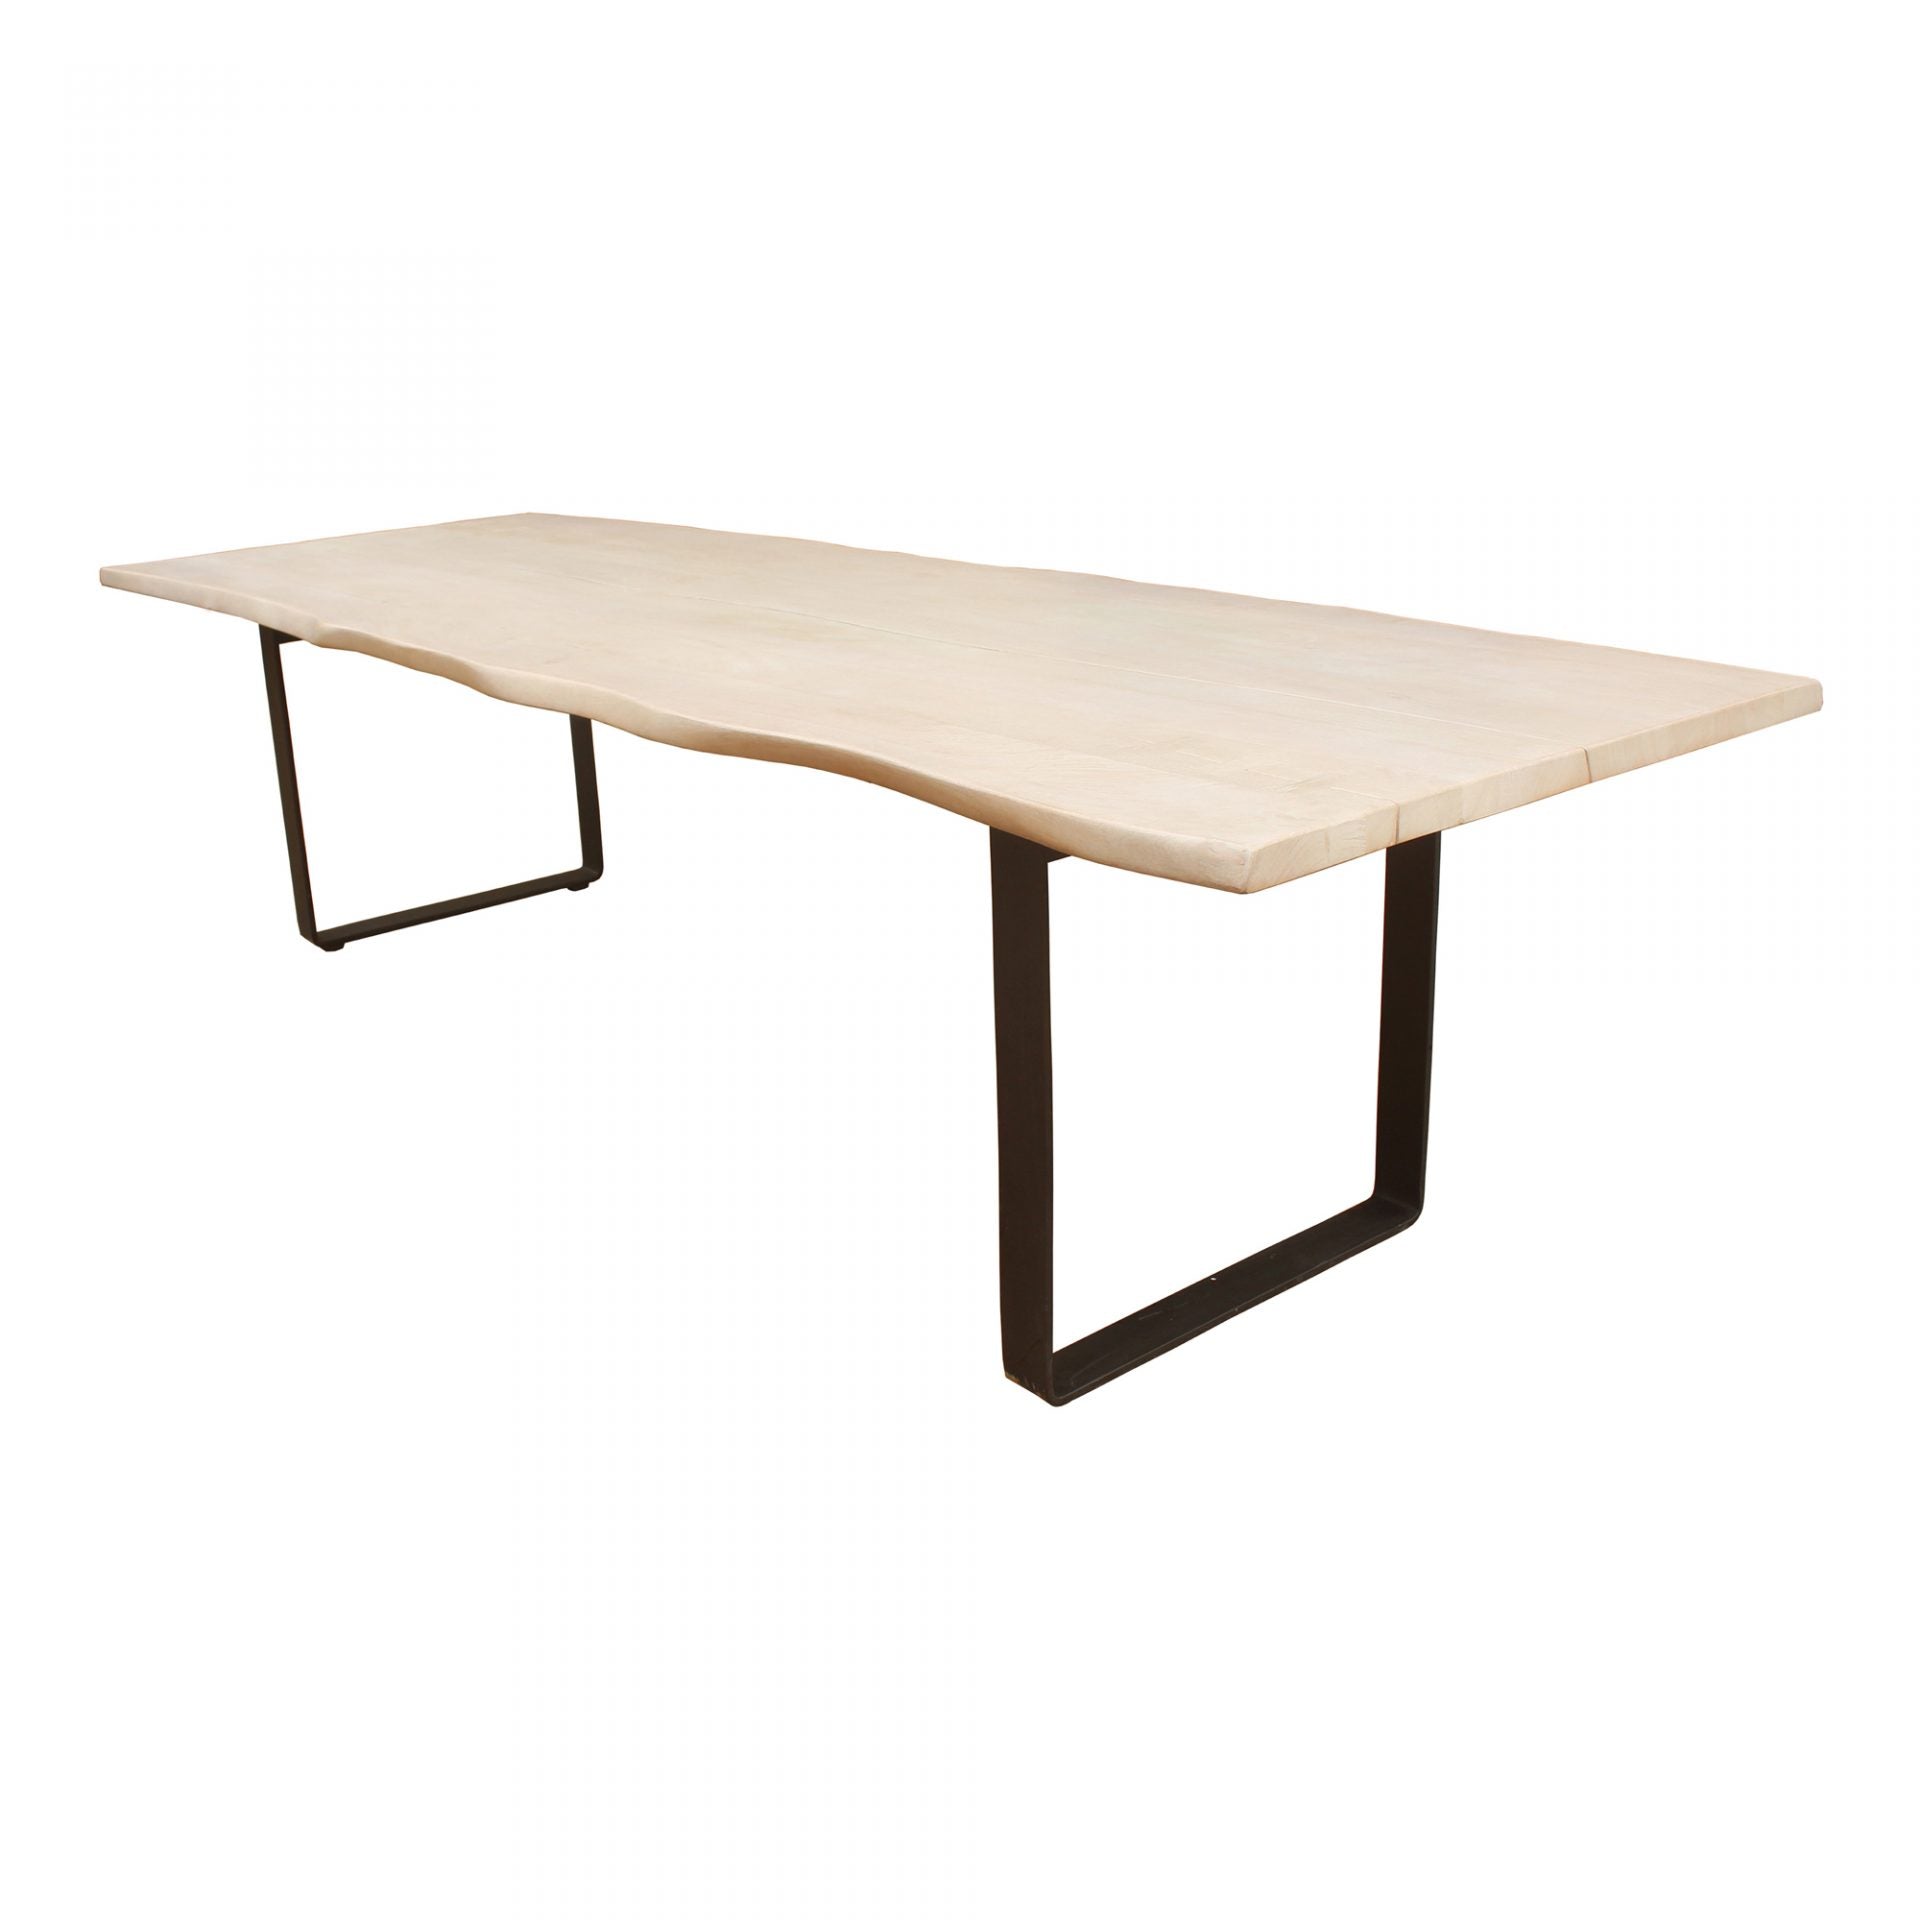 The Wilks Dining Table has a sturdy iron frame with a gorgeous, natural piece of white wood for the top. Each table is completely unique to you!  Size: 118"W x 39"D x 30"H Material: Solid Mango, Iron Legs